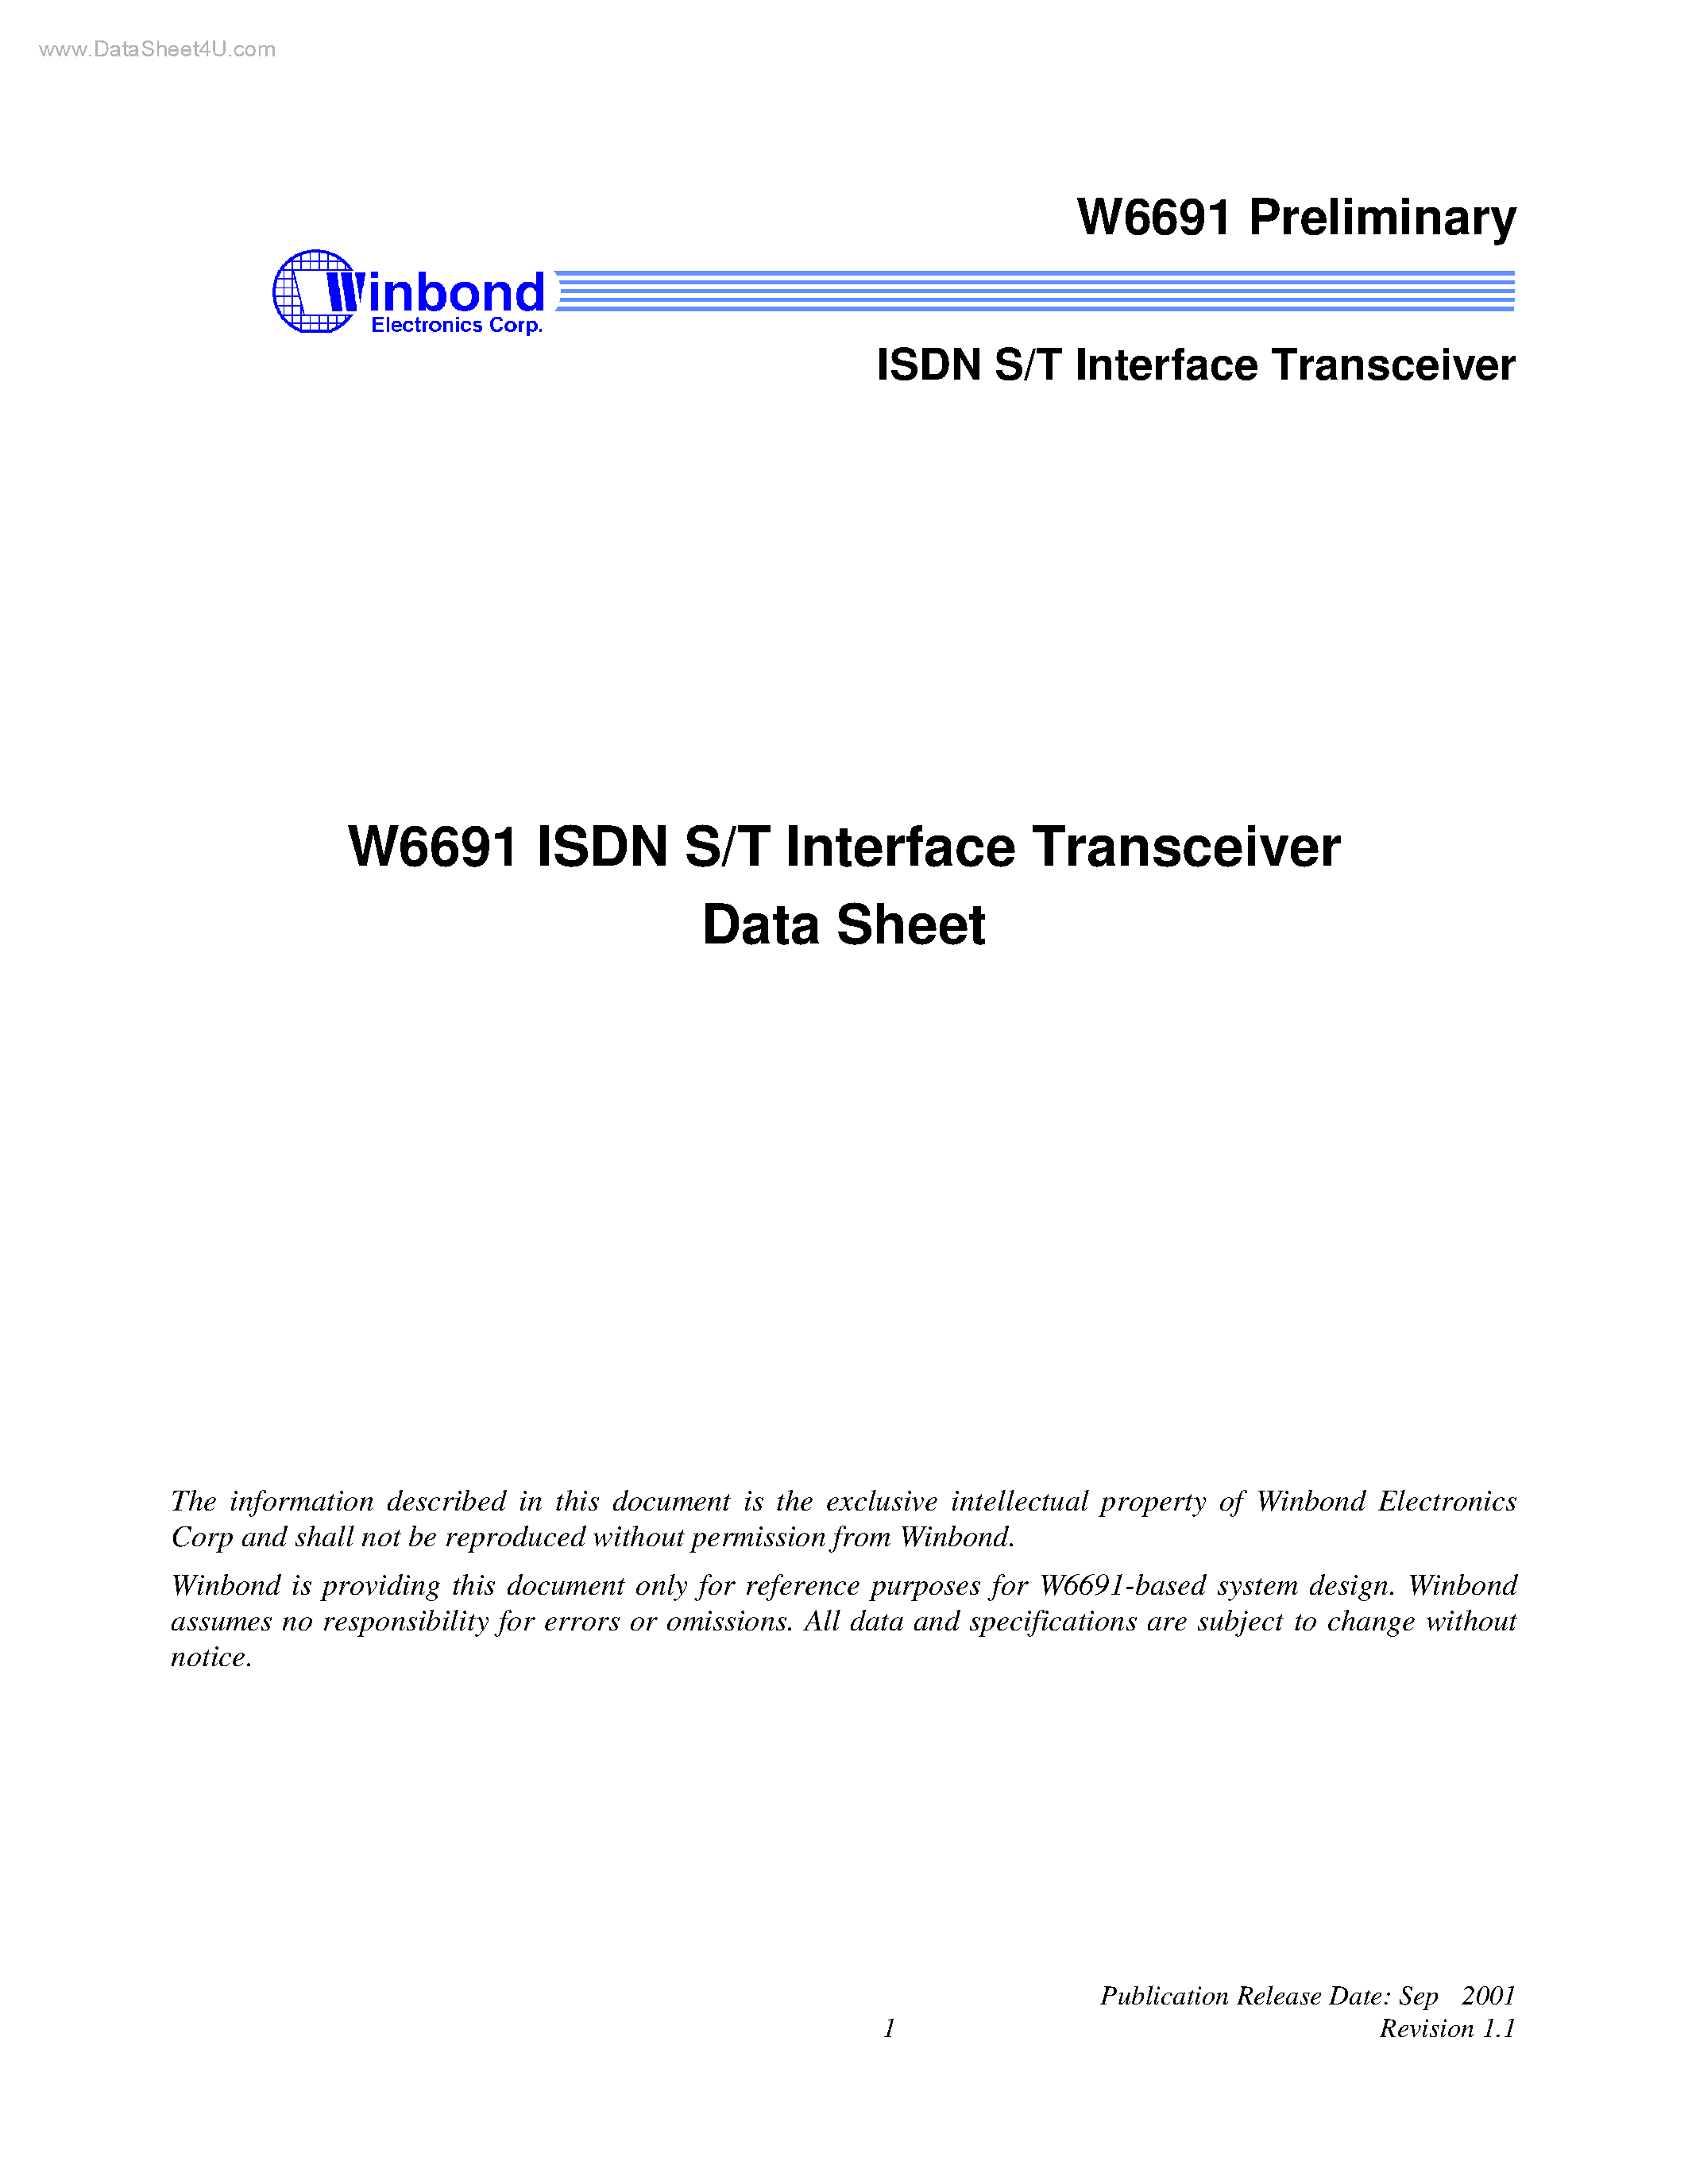 Datasheet W6691 - ISDN S/T Interface Transceiver page 1